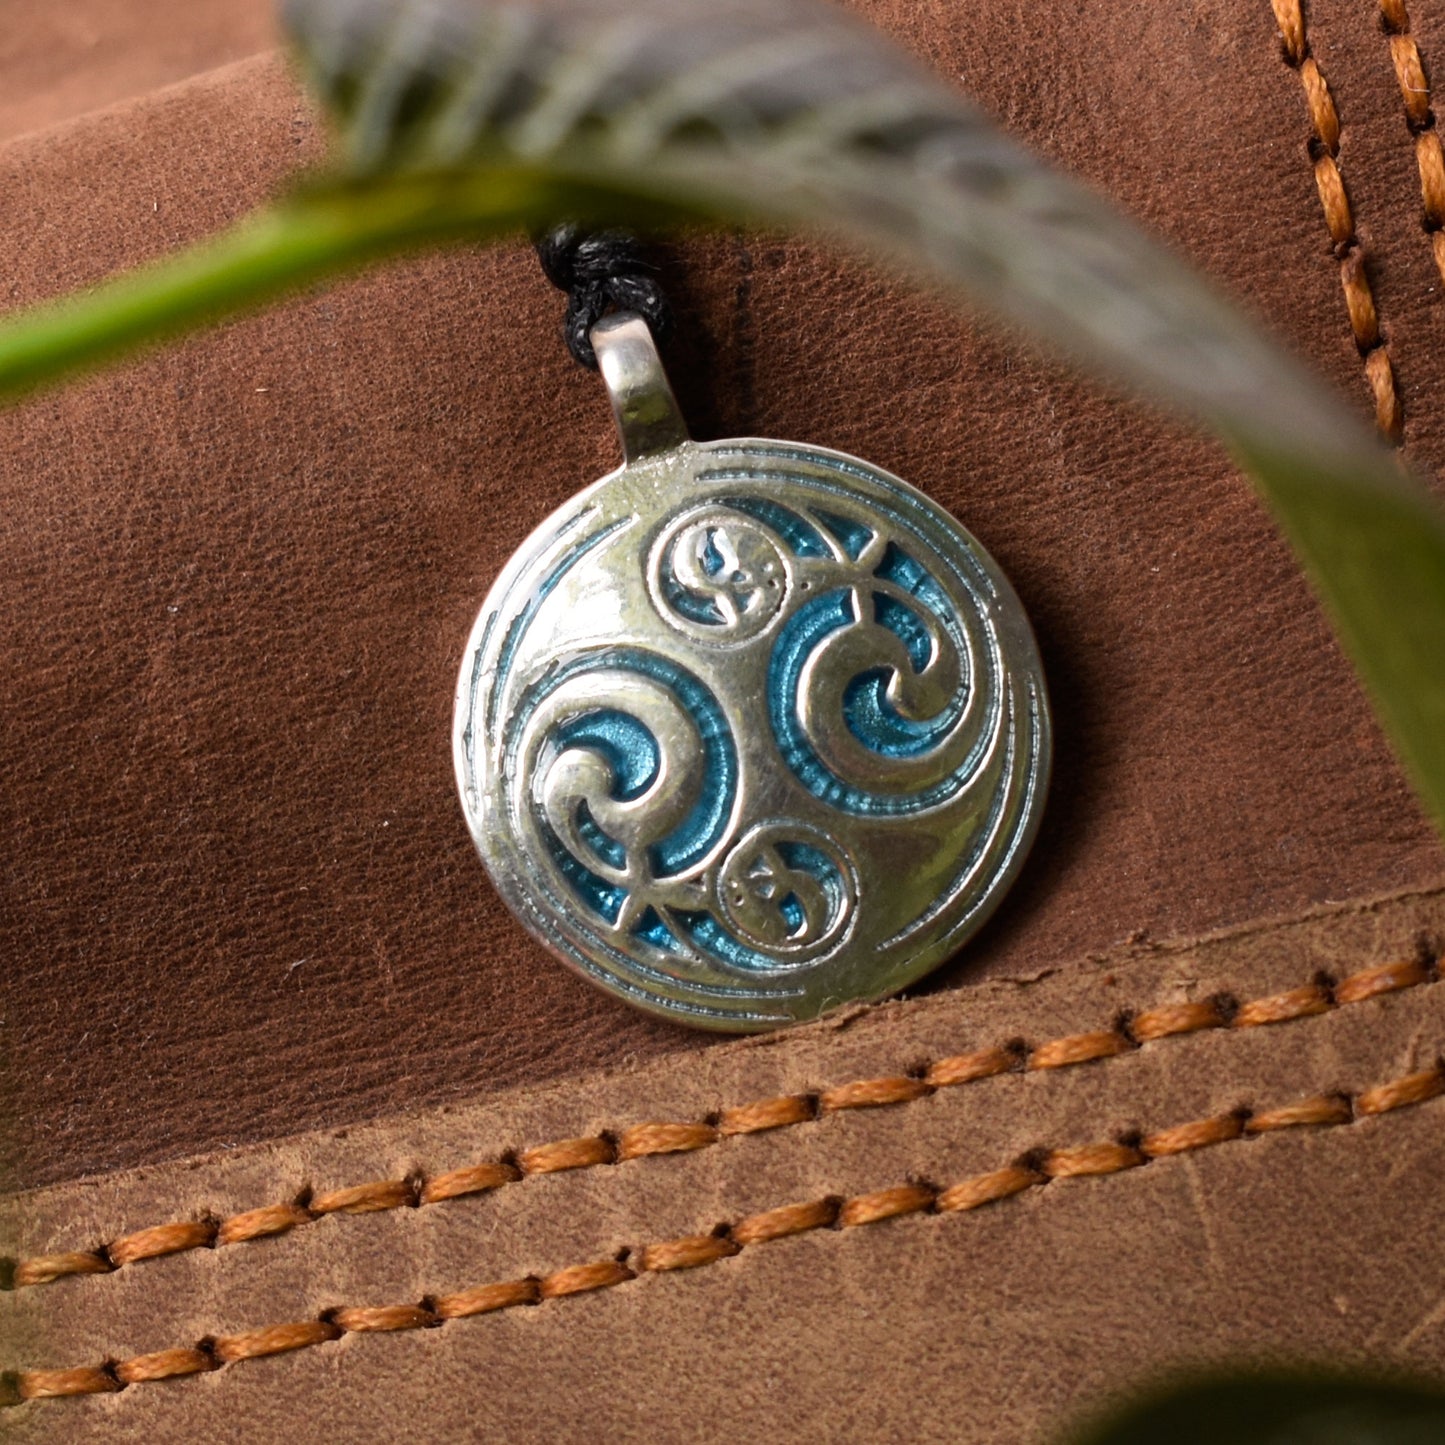 Stunning Ying Yang Feng Shui Silver Pewter Charm Necklace Pendant Jewelry